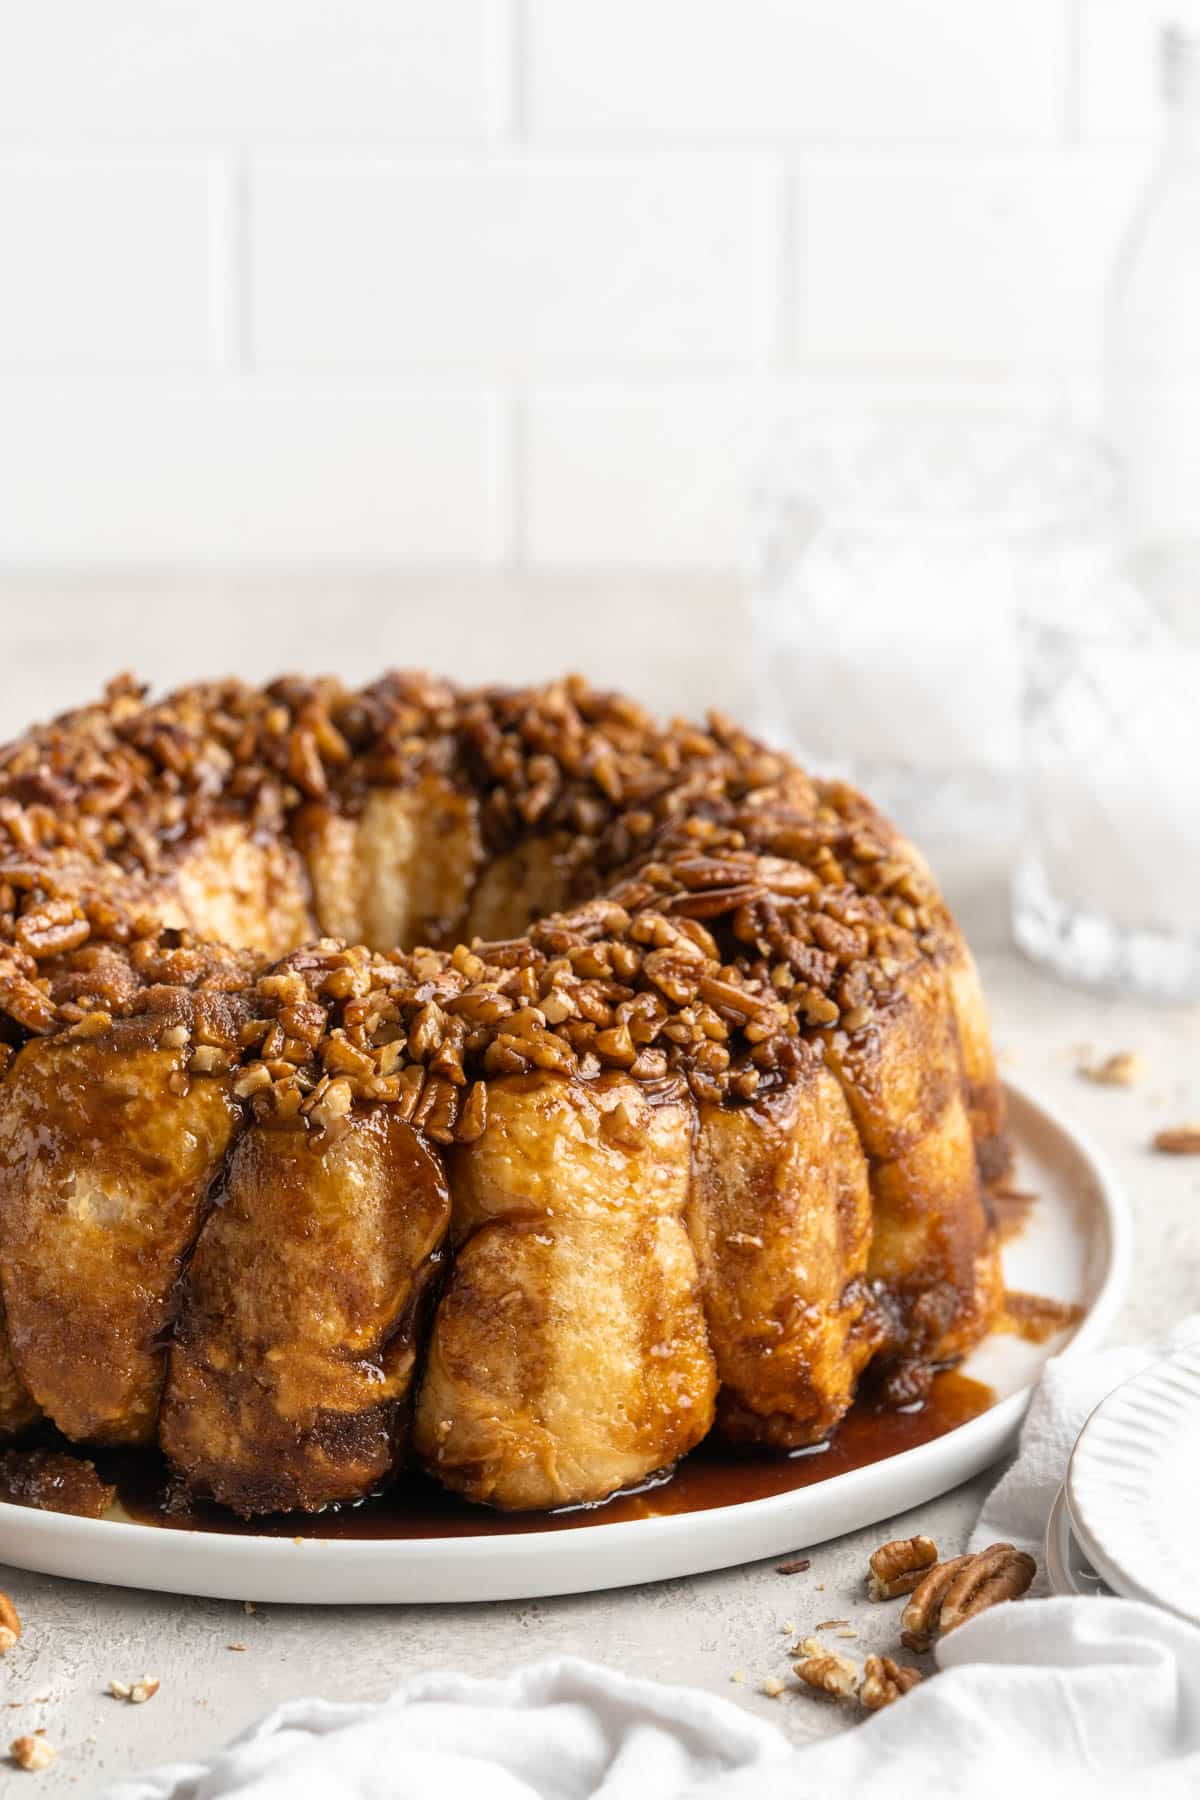 Monkey bread served on a large white plate.